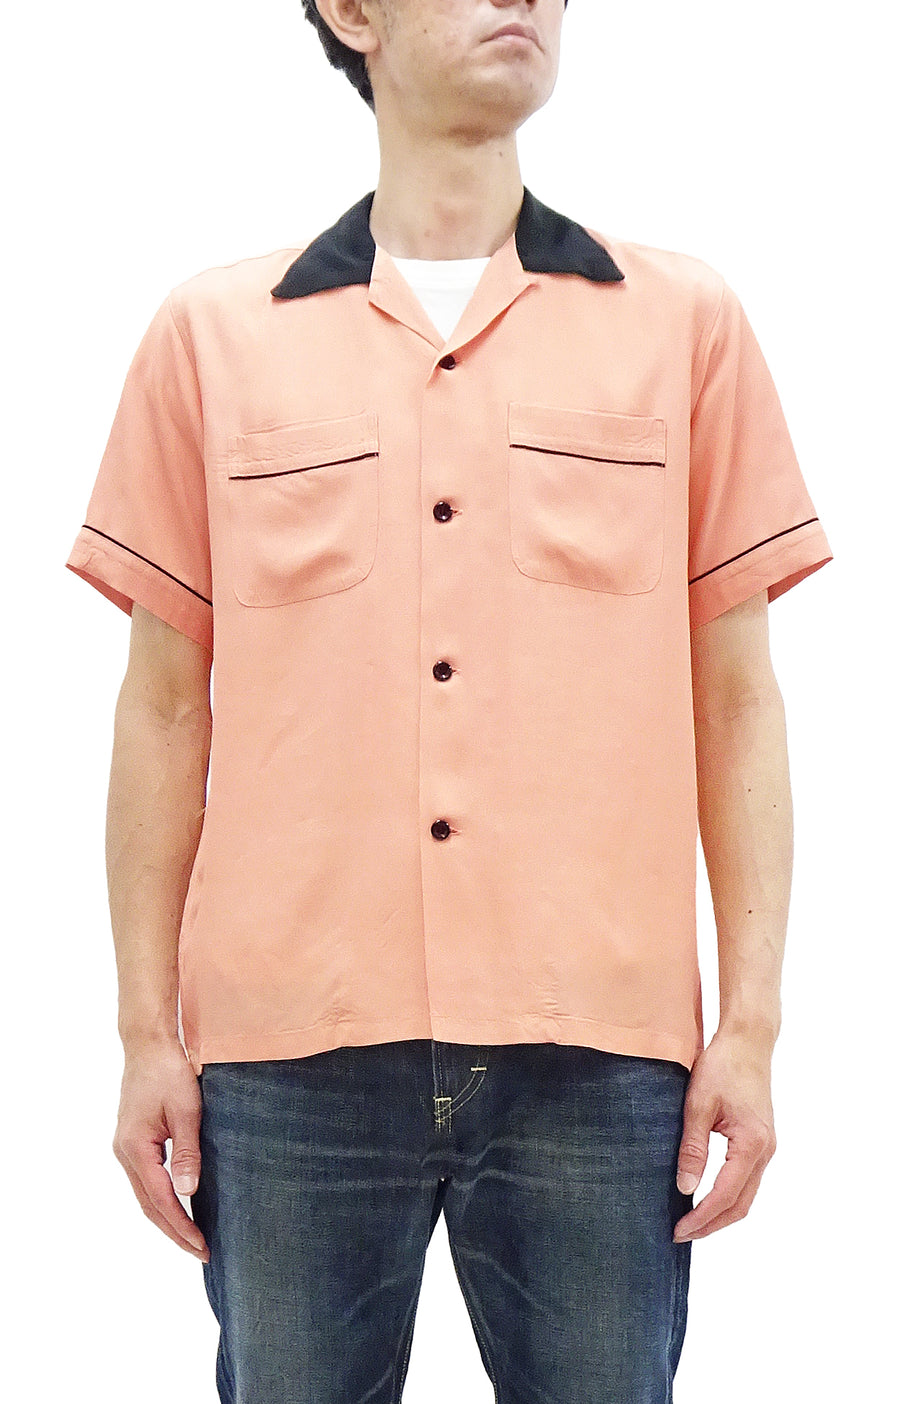 Style Eyes Two-Tone Rayon Bowling Shirt Men's 1950s Style Short 